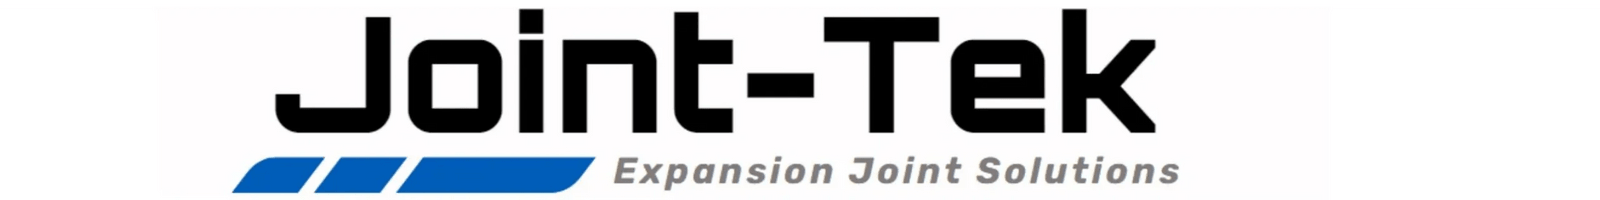 Joint-Tek
Expansion Joint Systems and Solutions